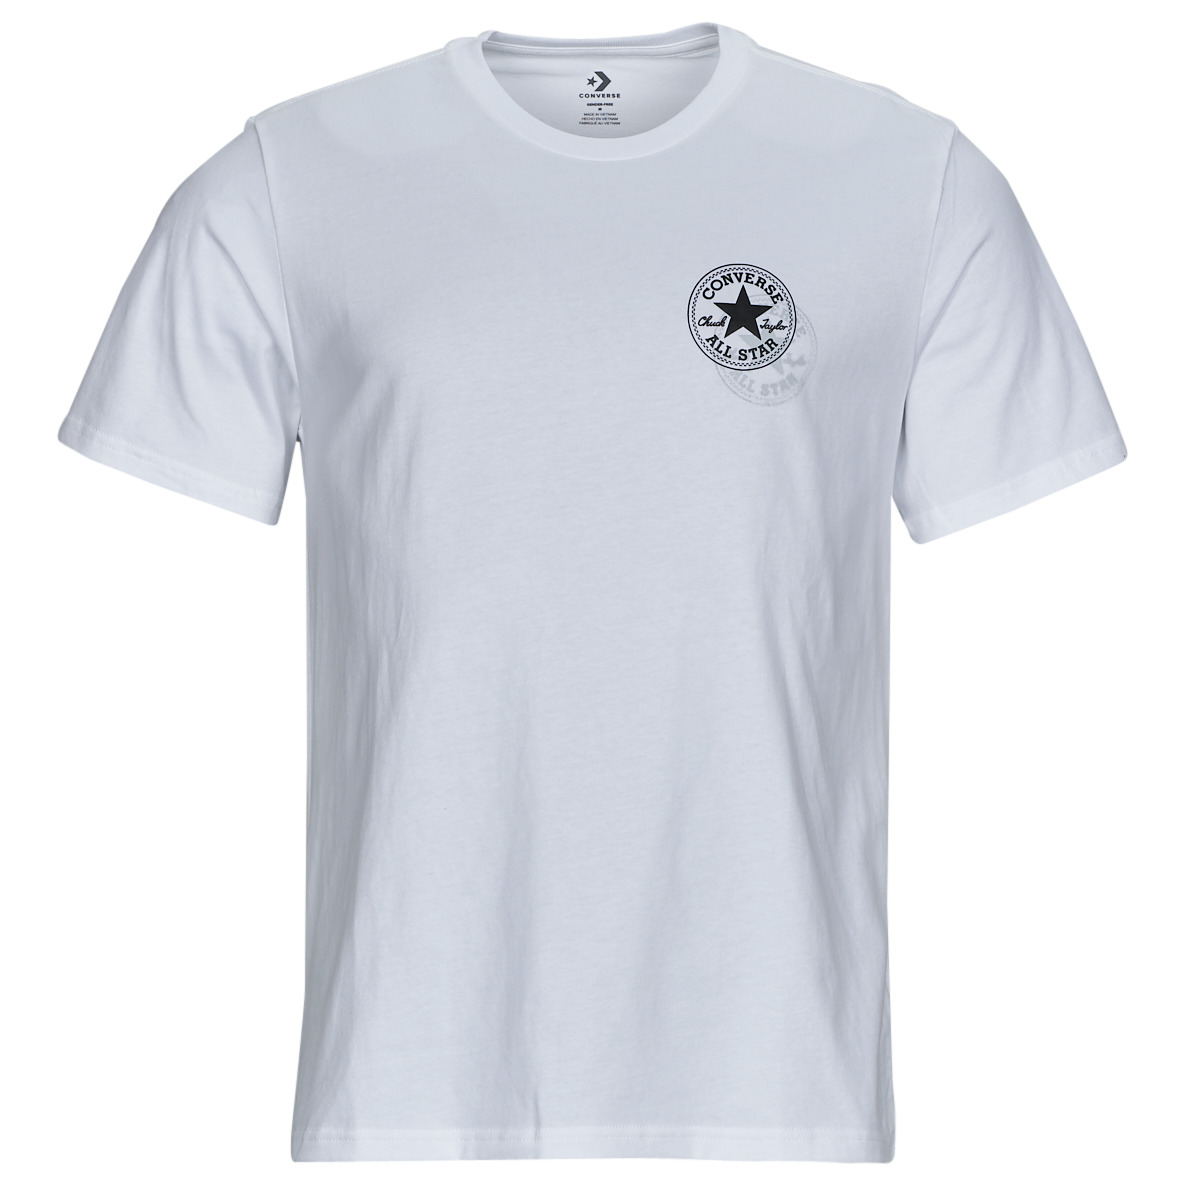 Converse GO-TO ALL STAR PATCH White - Fast delivery | Spartoo Europe ! -  Clothing short-sleeved t-shirts Men 26,40 €